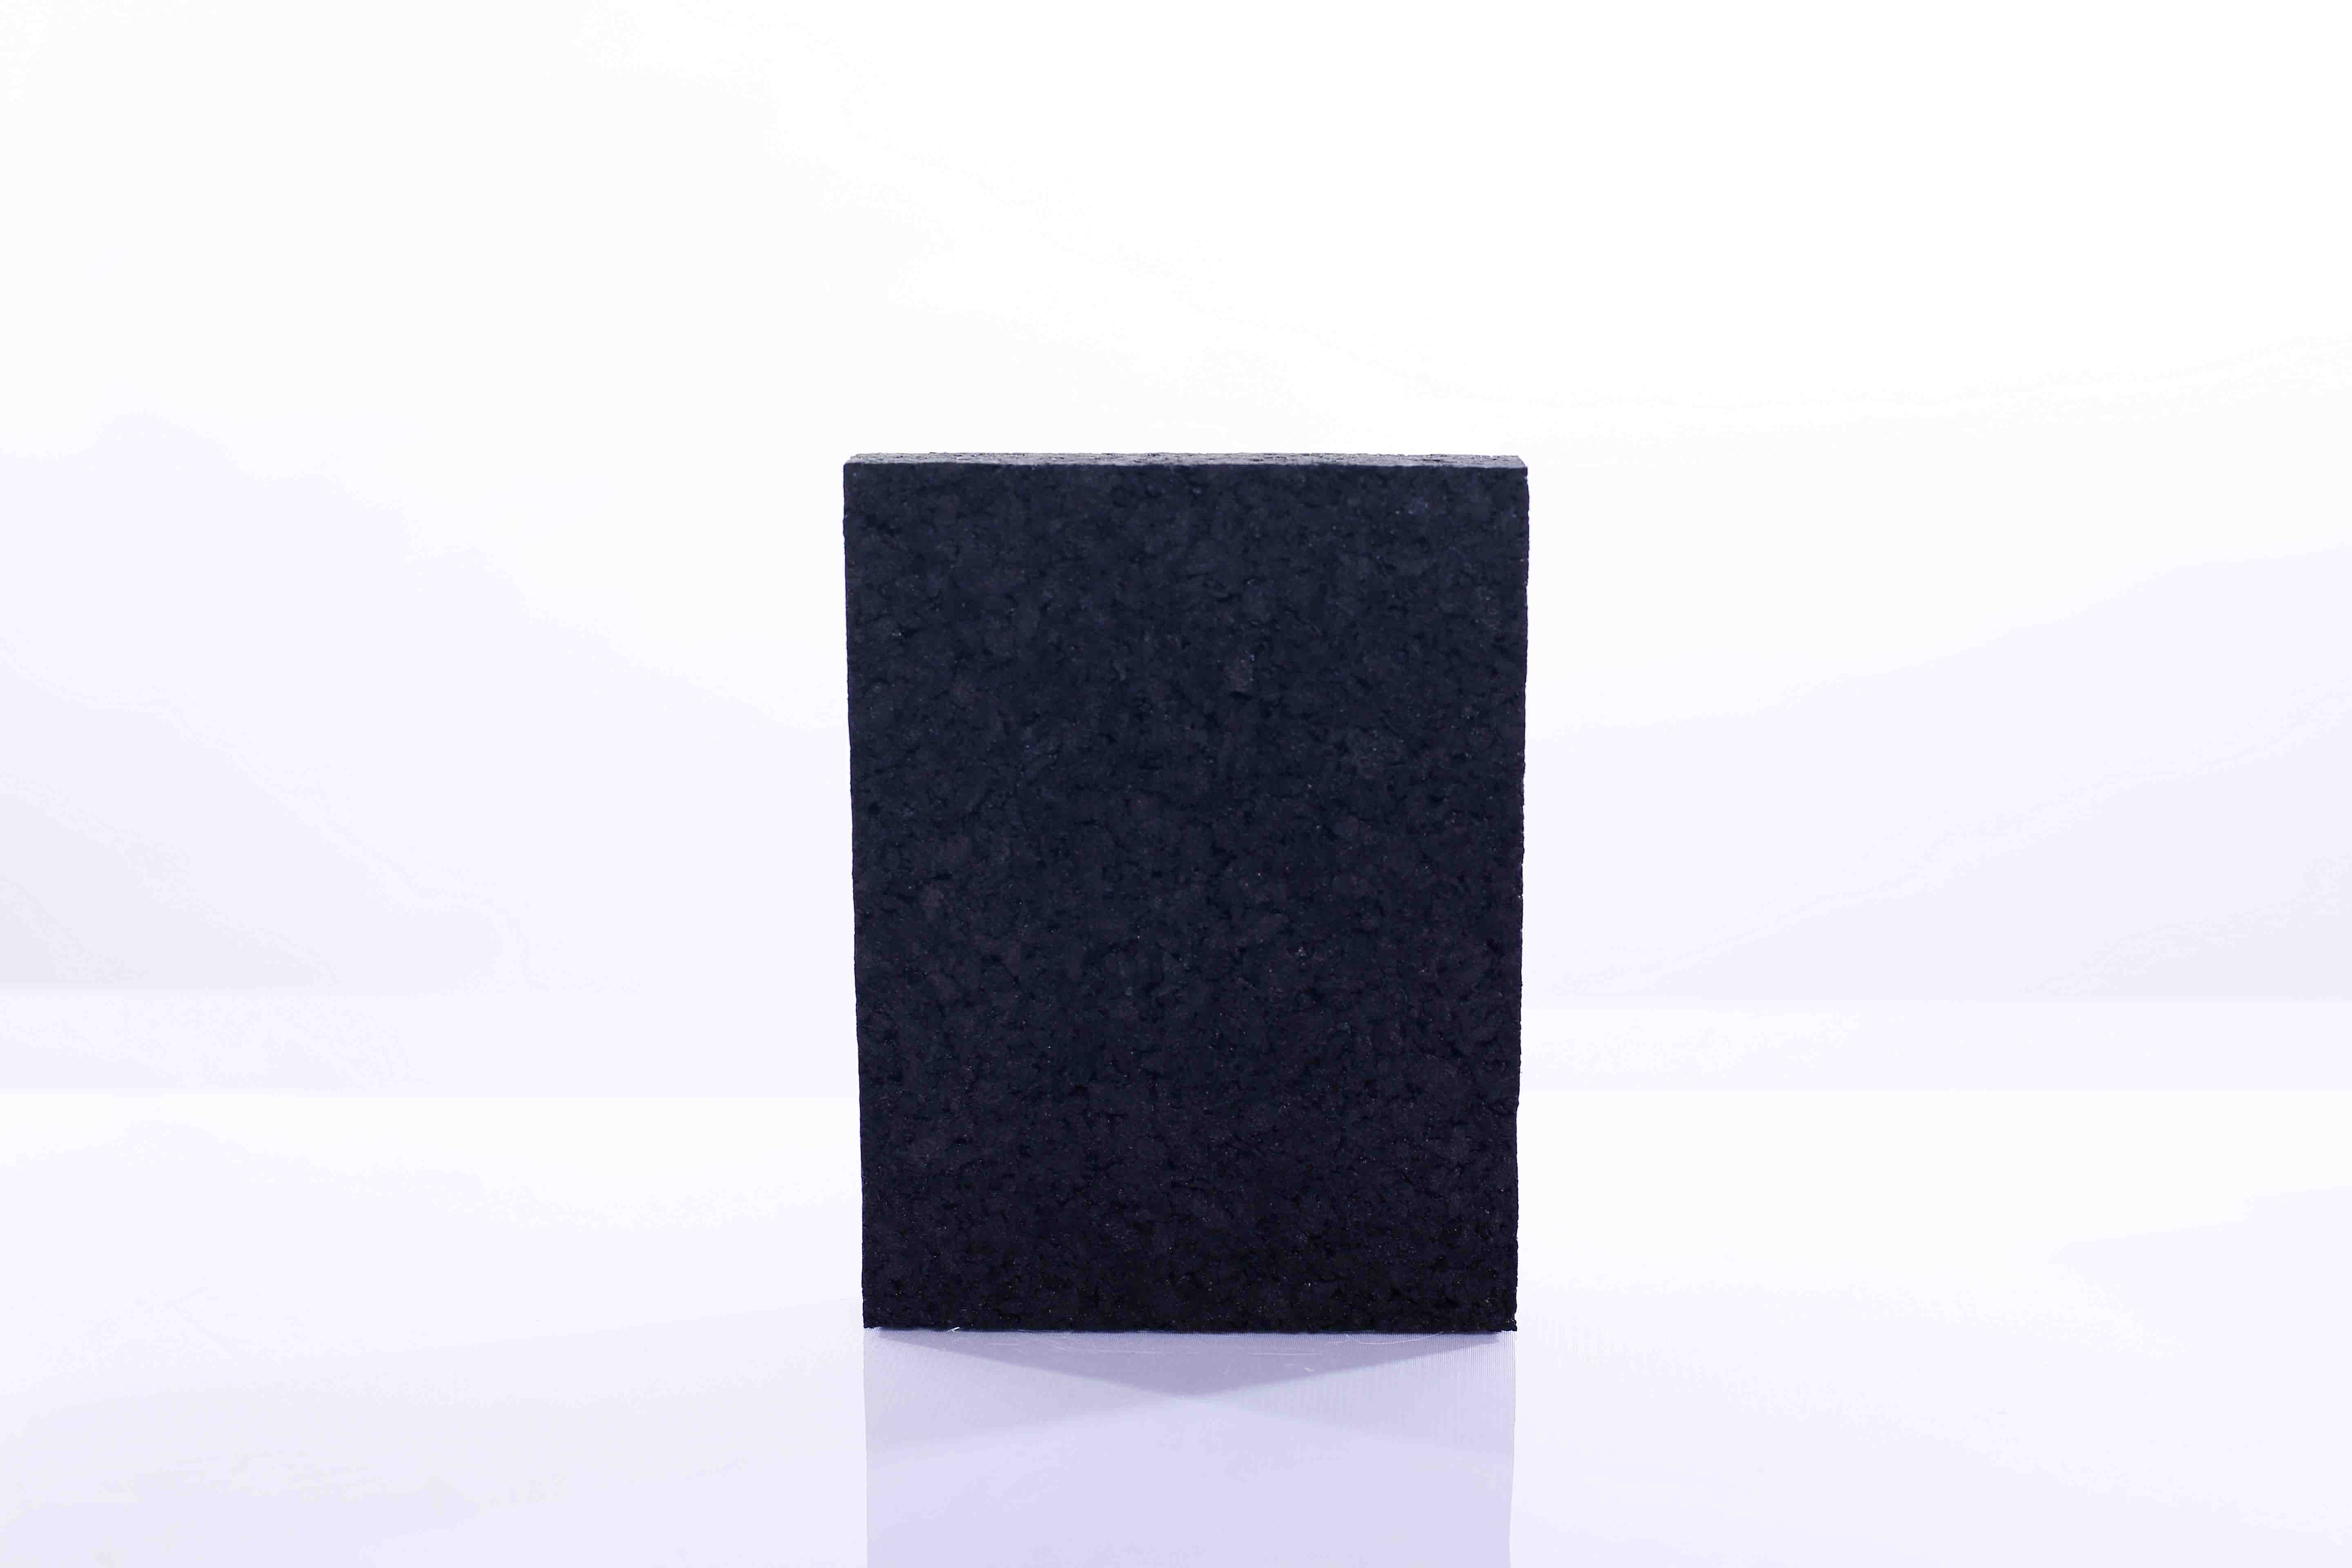 Wholesale Price Sound Absorbing Floor Insulation - Flexible rubber foam sound insulation with 6mm in thickness – Kingflex